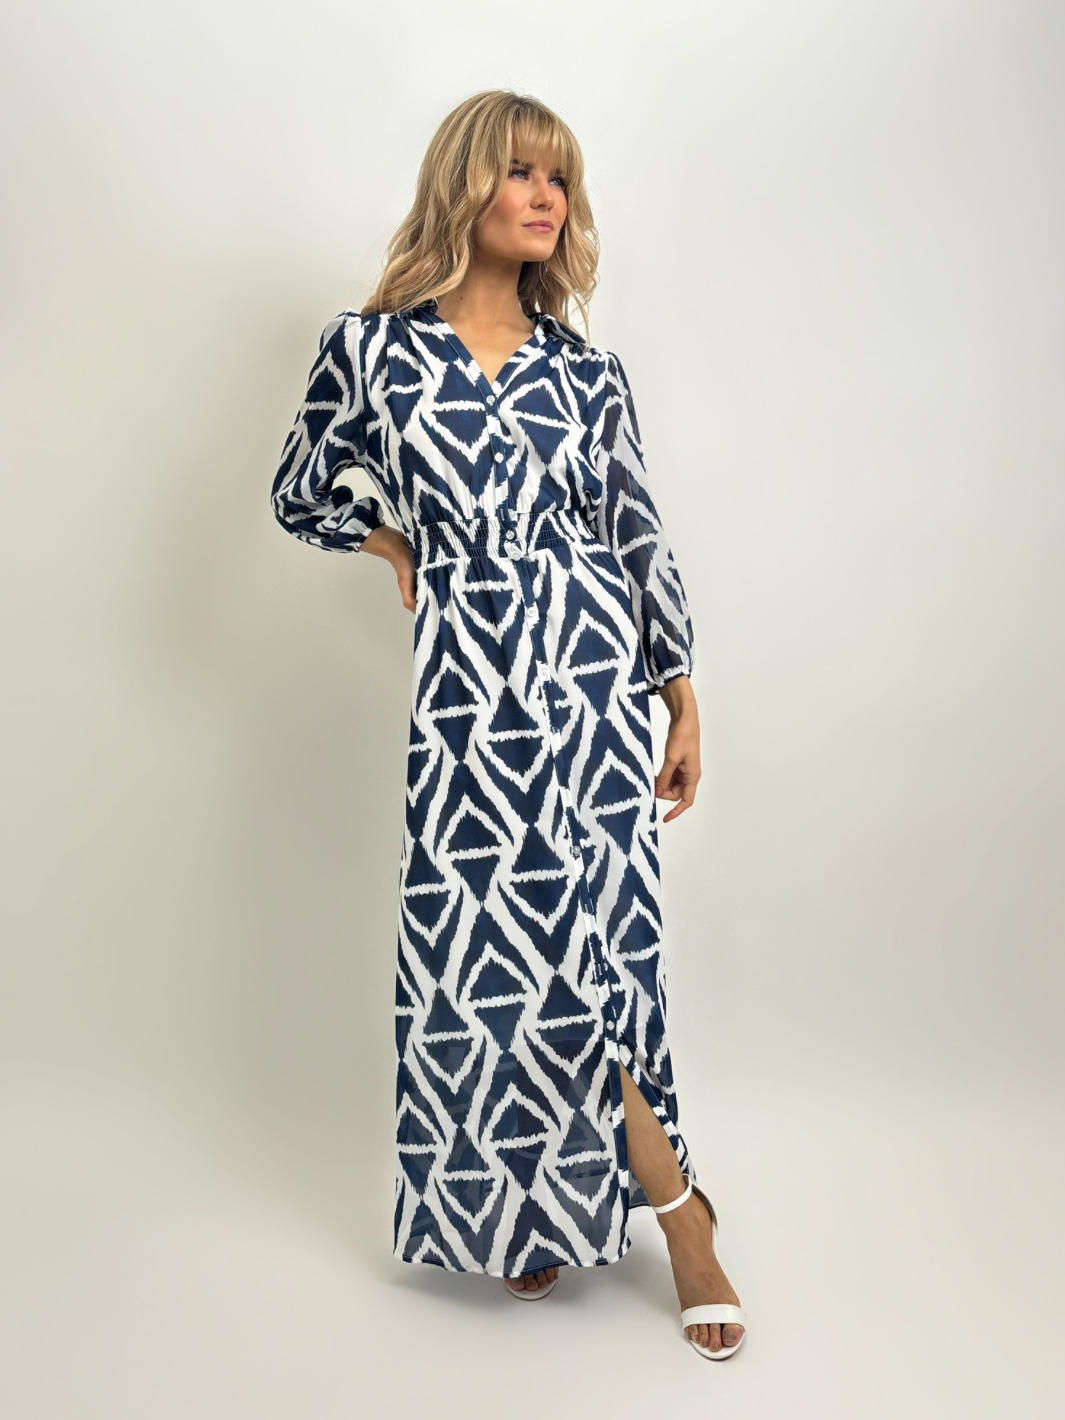 Kate & Pippa Carrie Shirt Dress in Navy / White Print-Nicola Ross